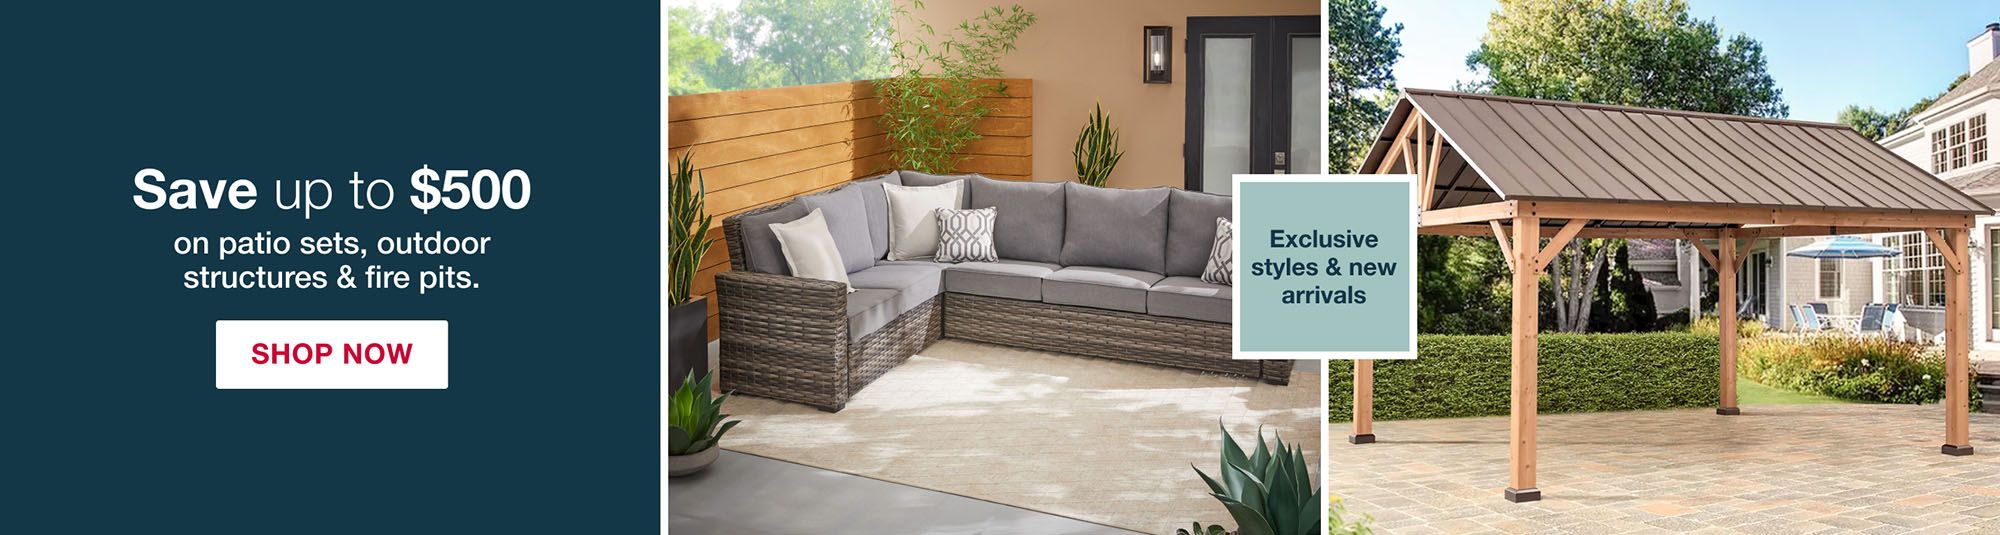 Save up to $500 plus $99 flat-rate shipping on patio sets, outdoor structures and fire pits. Click to shop now